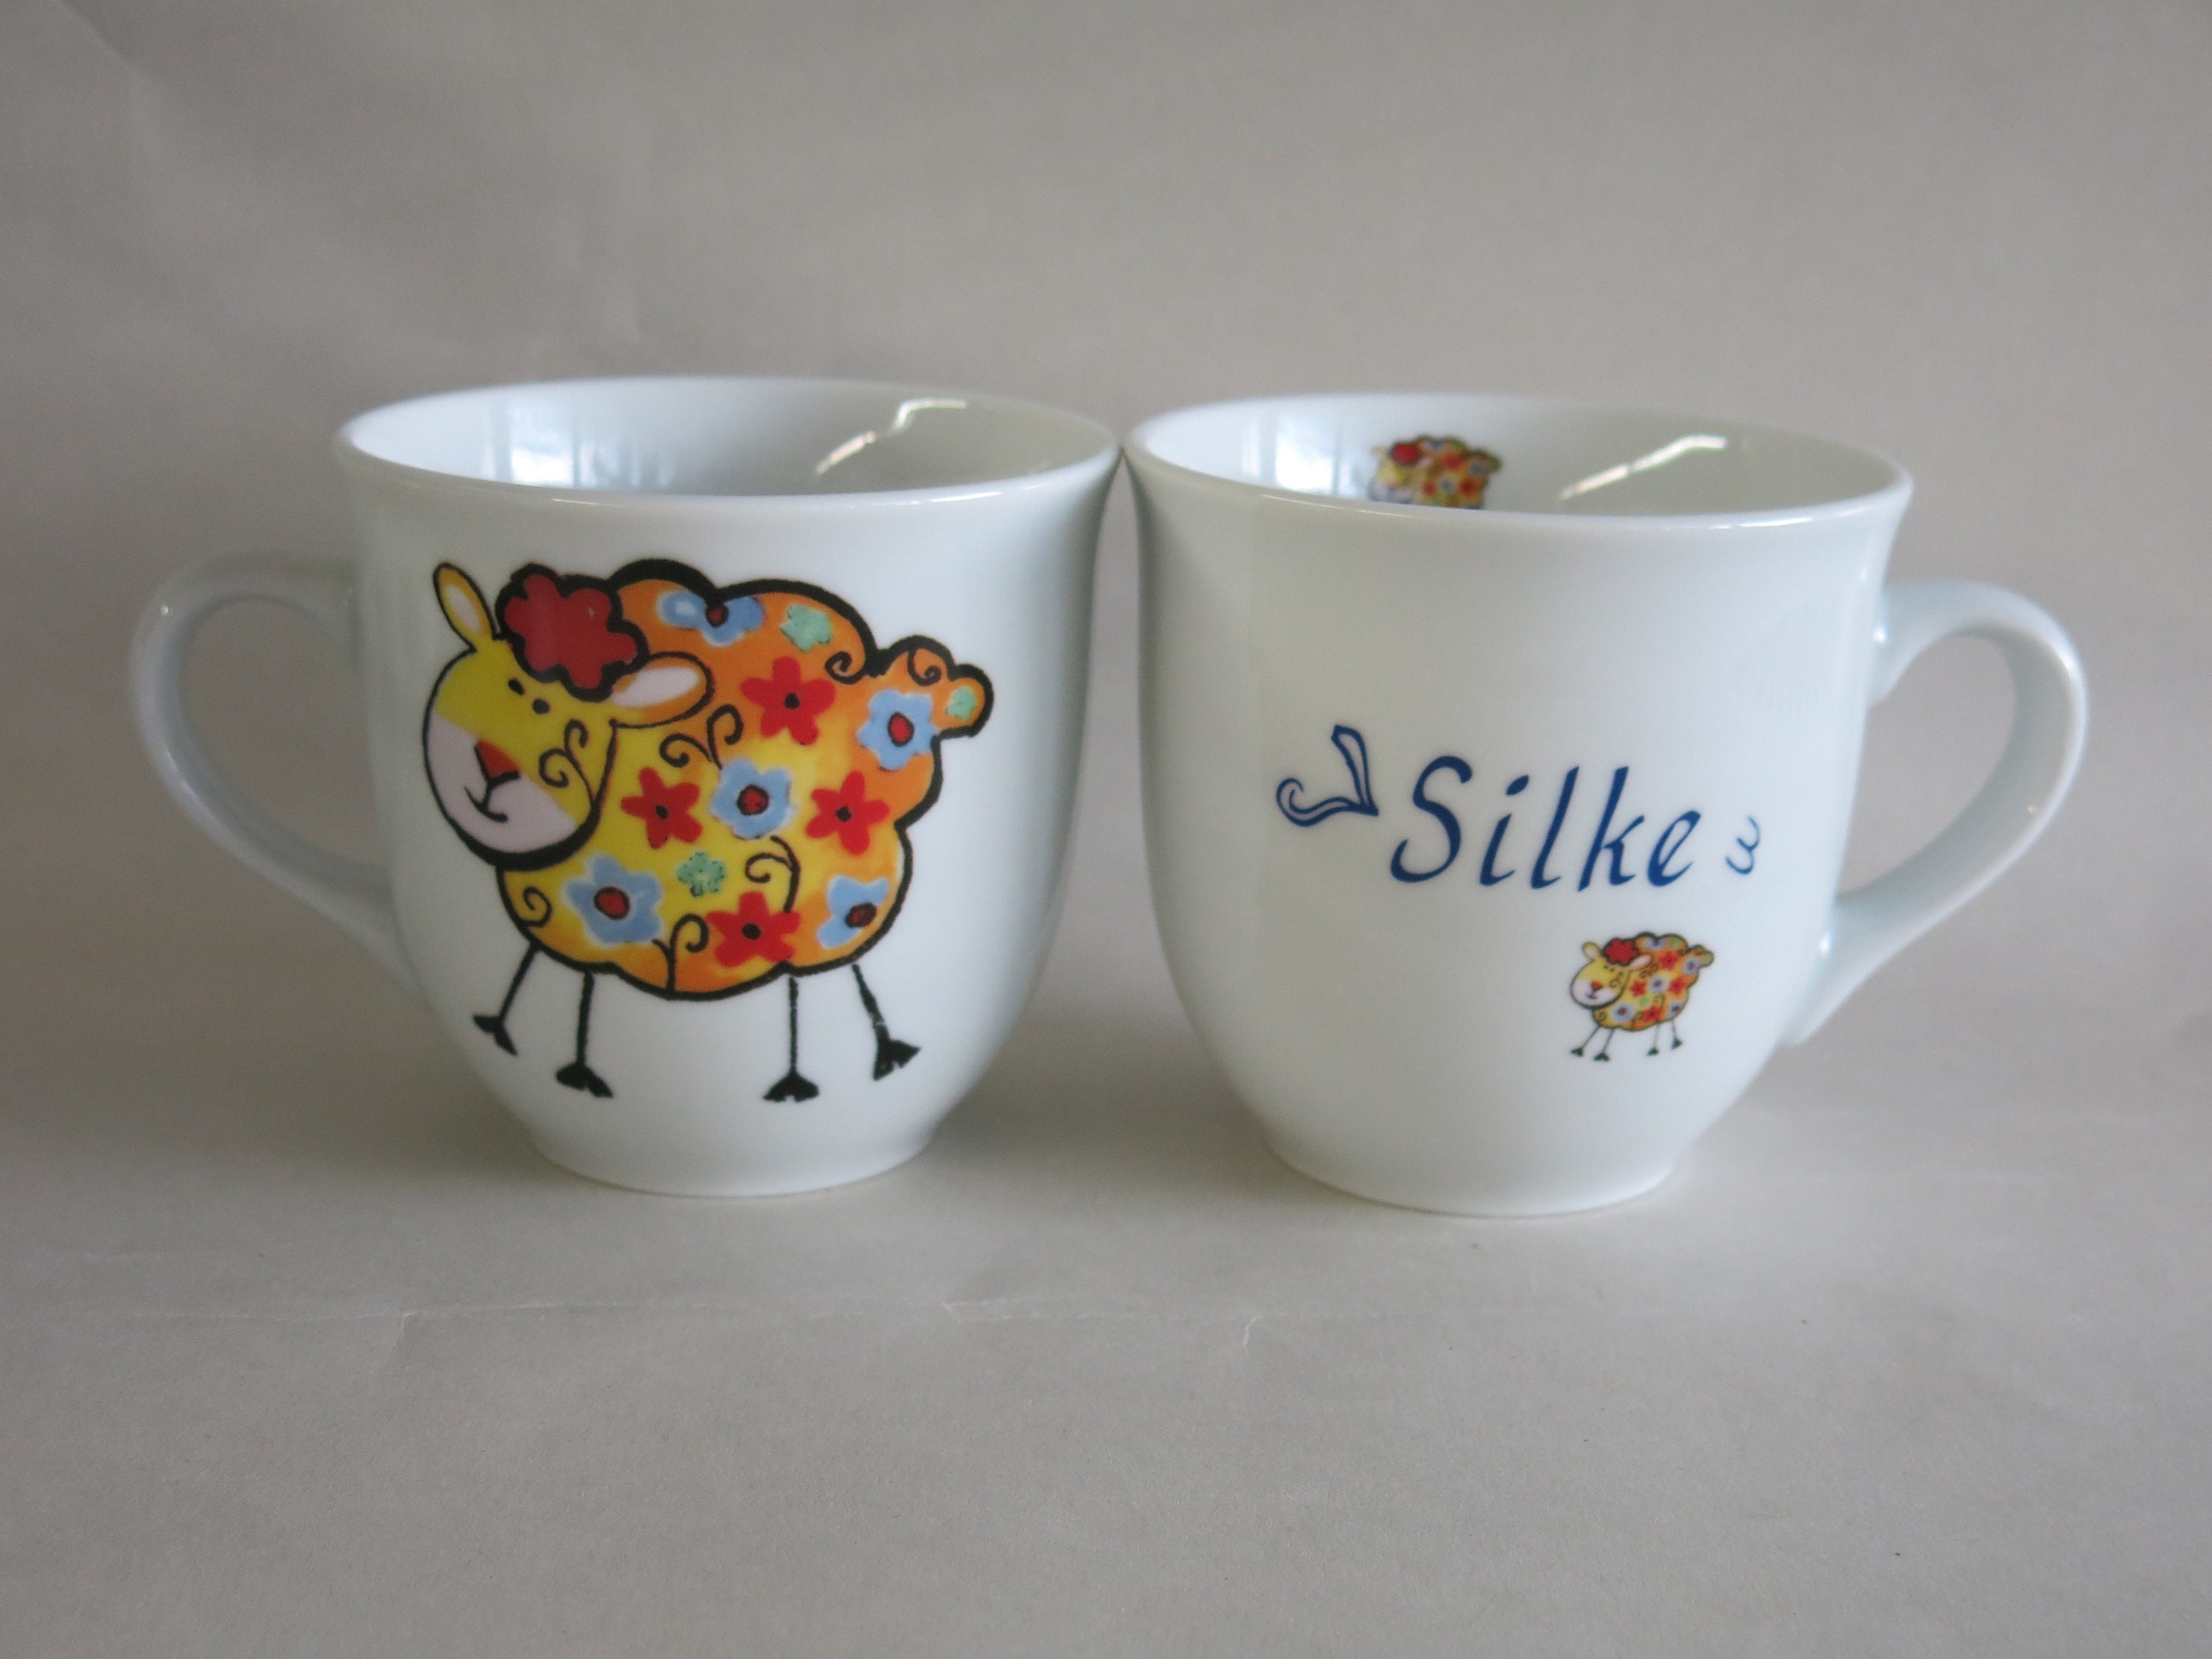 Large Name Cups With Colorful Flower Power Sheep. Sheep in 3 Colors With  Flowers in Their Fur, Personalized With Names on Cups. - Etsy Sweden